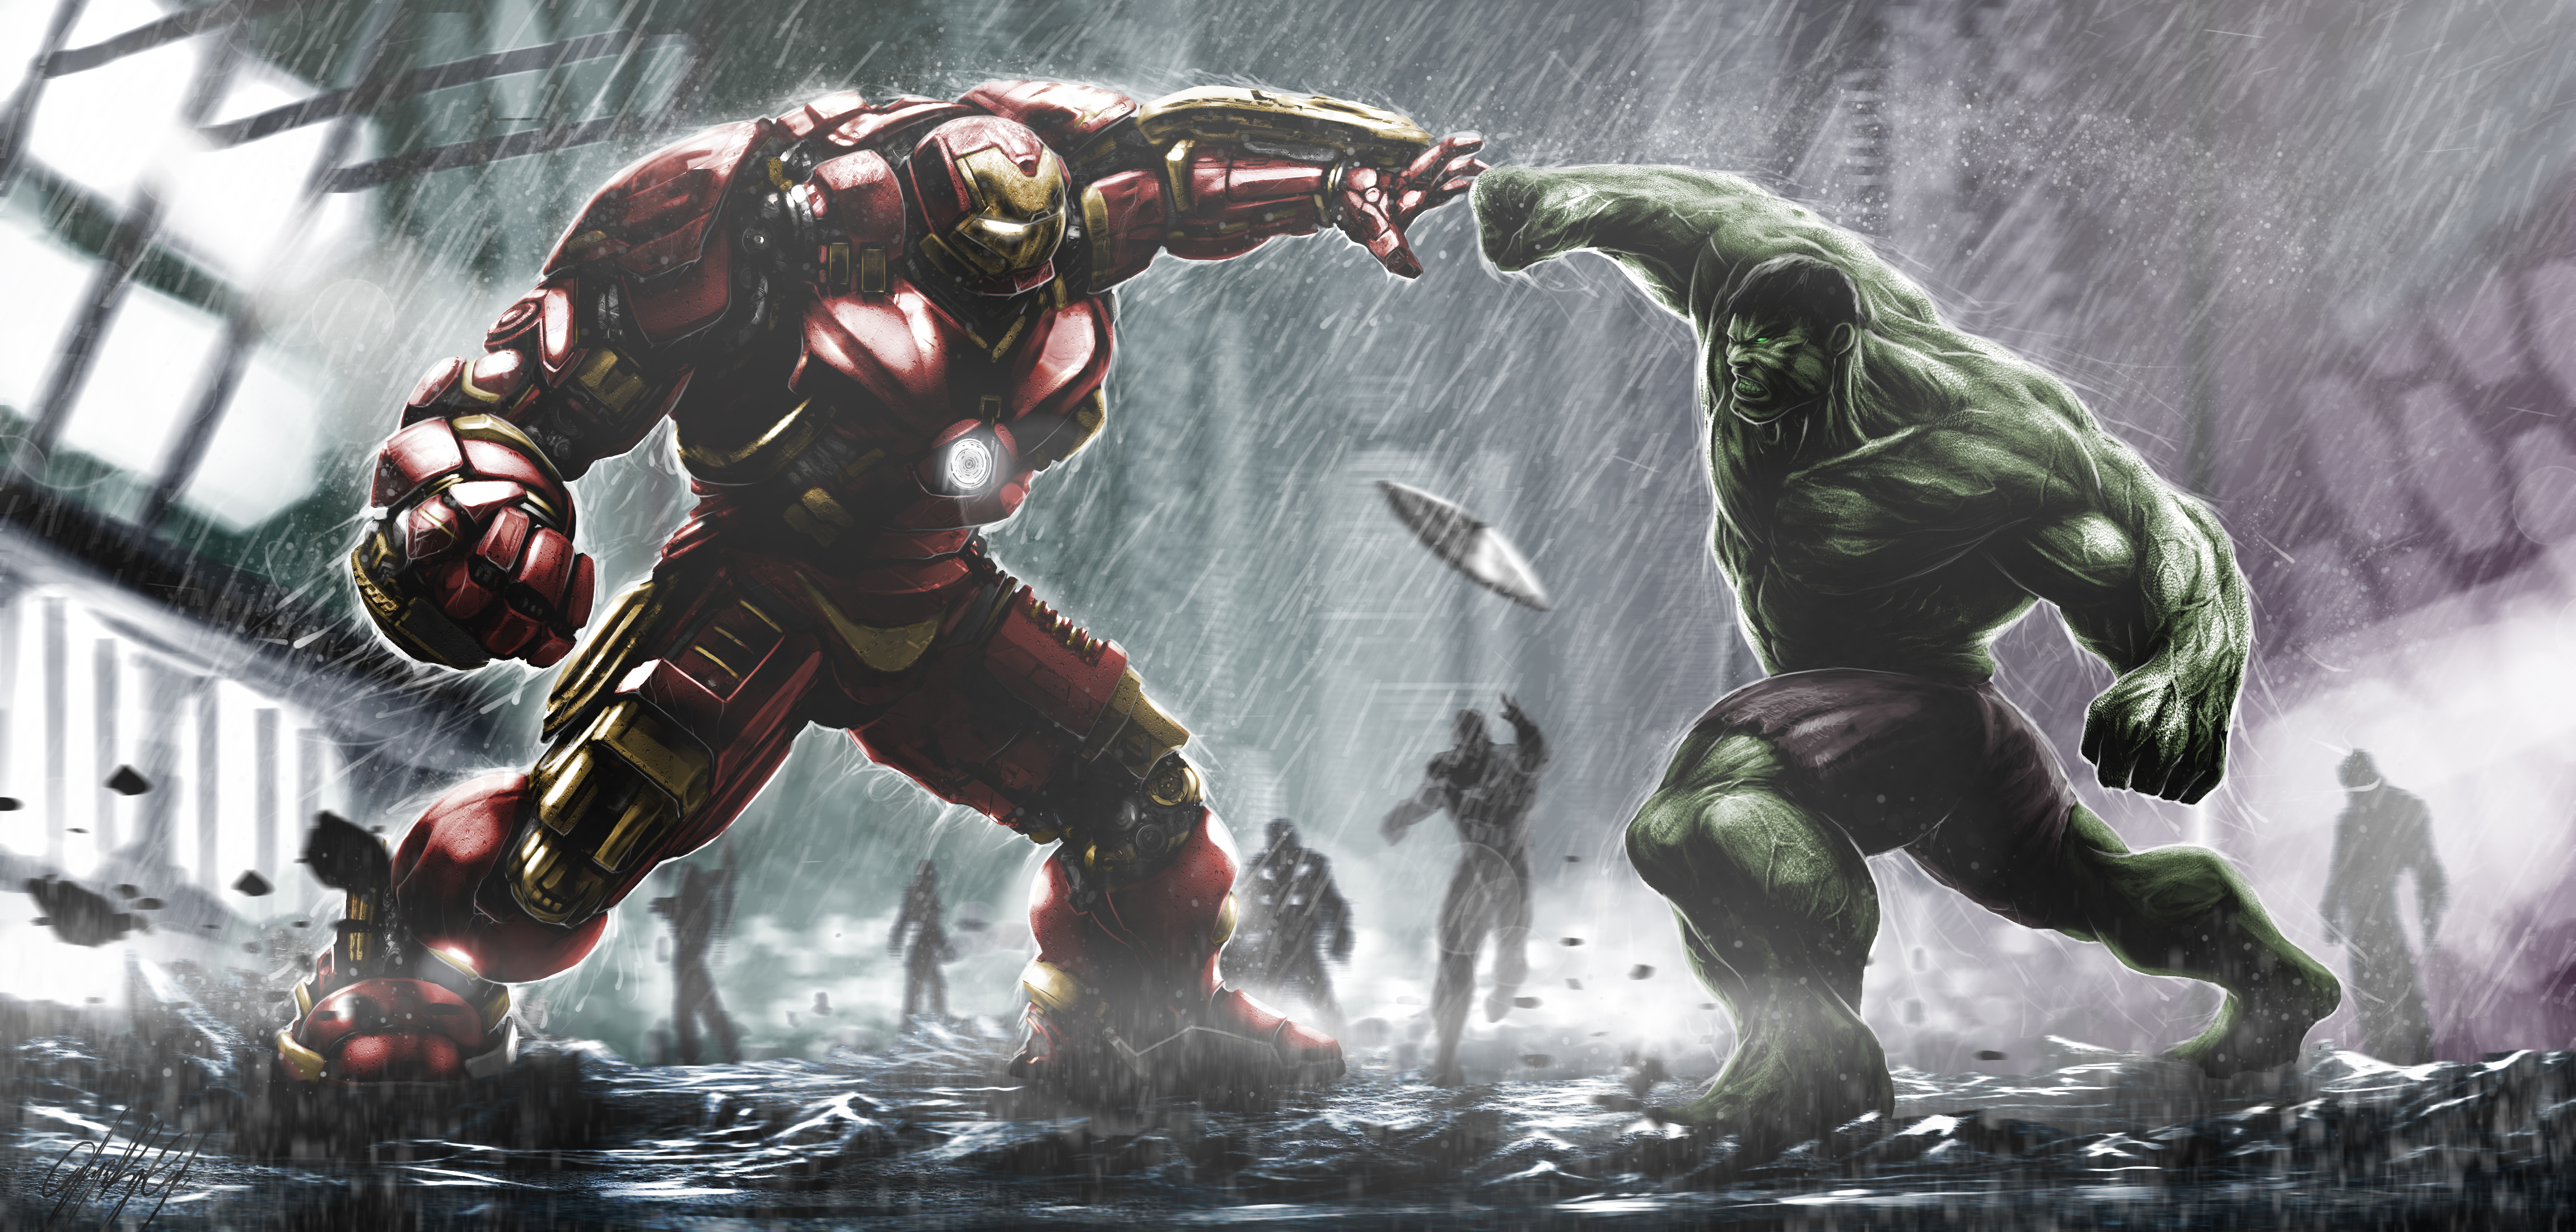 Cool Backgrounds  Hulkbuster